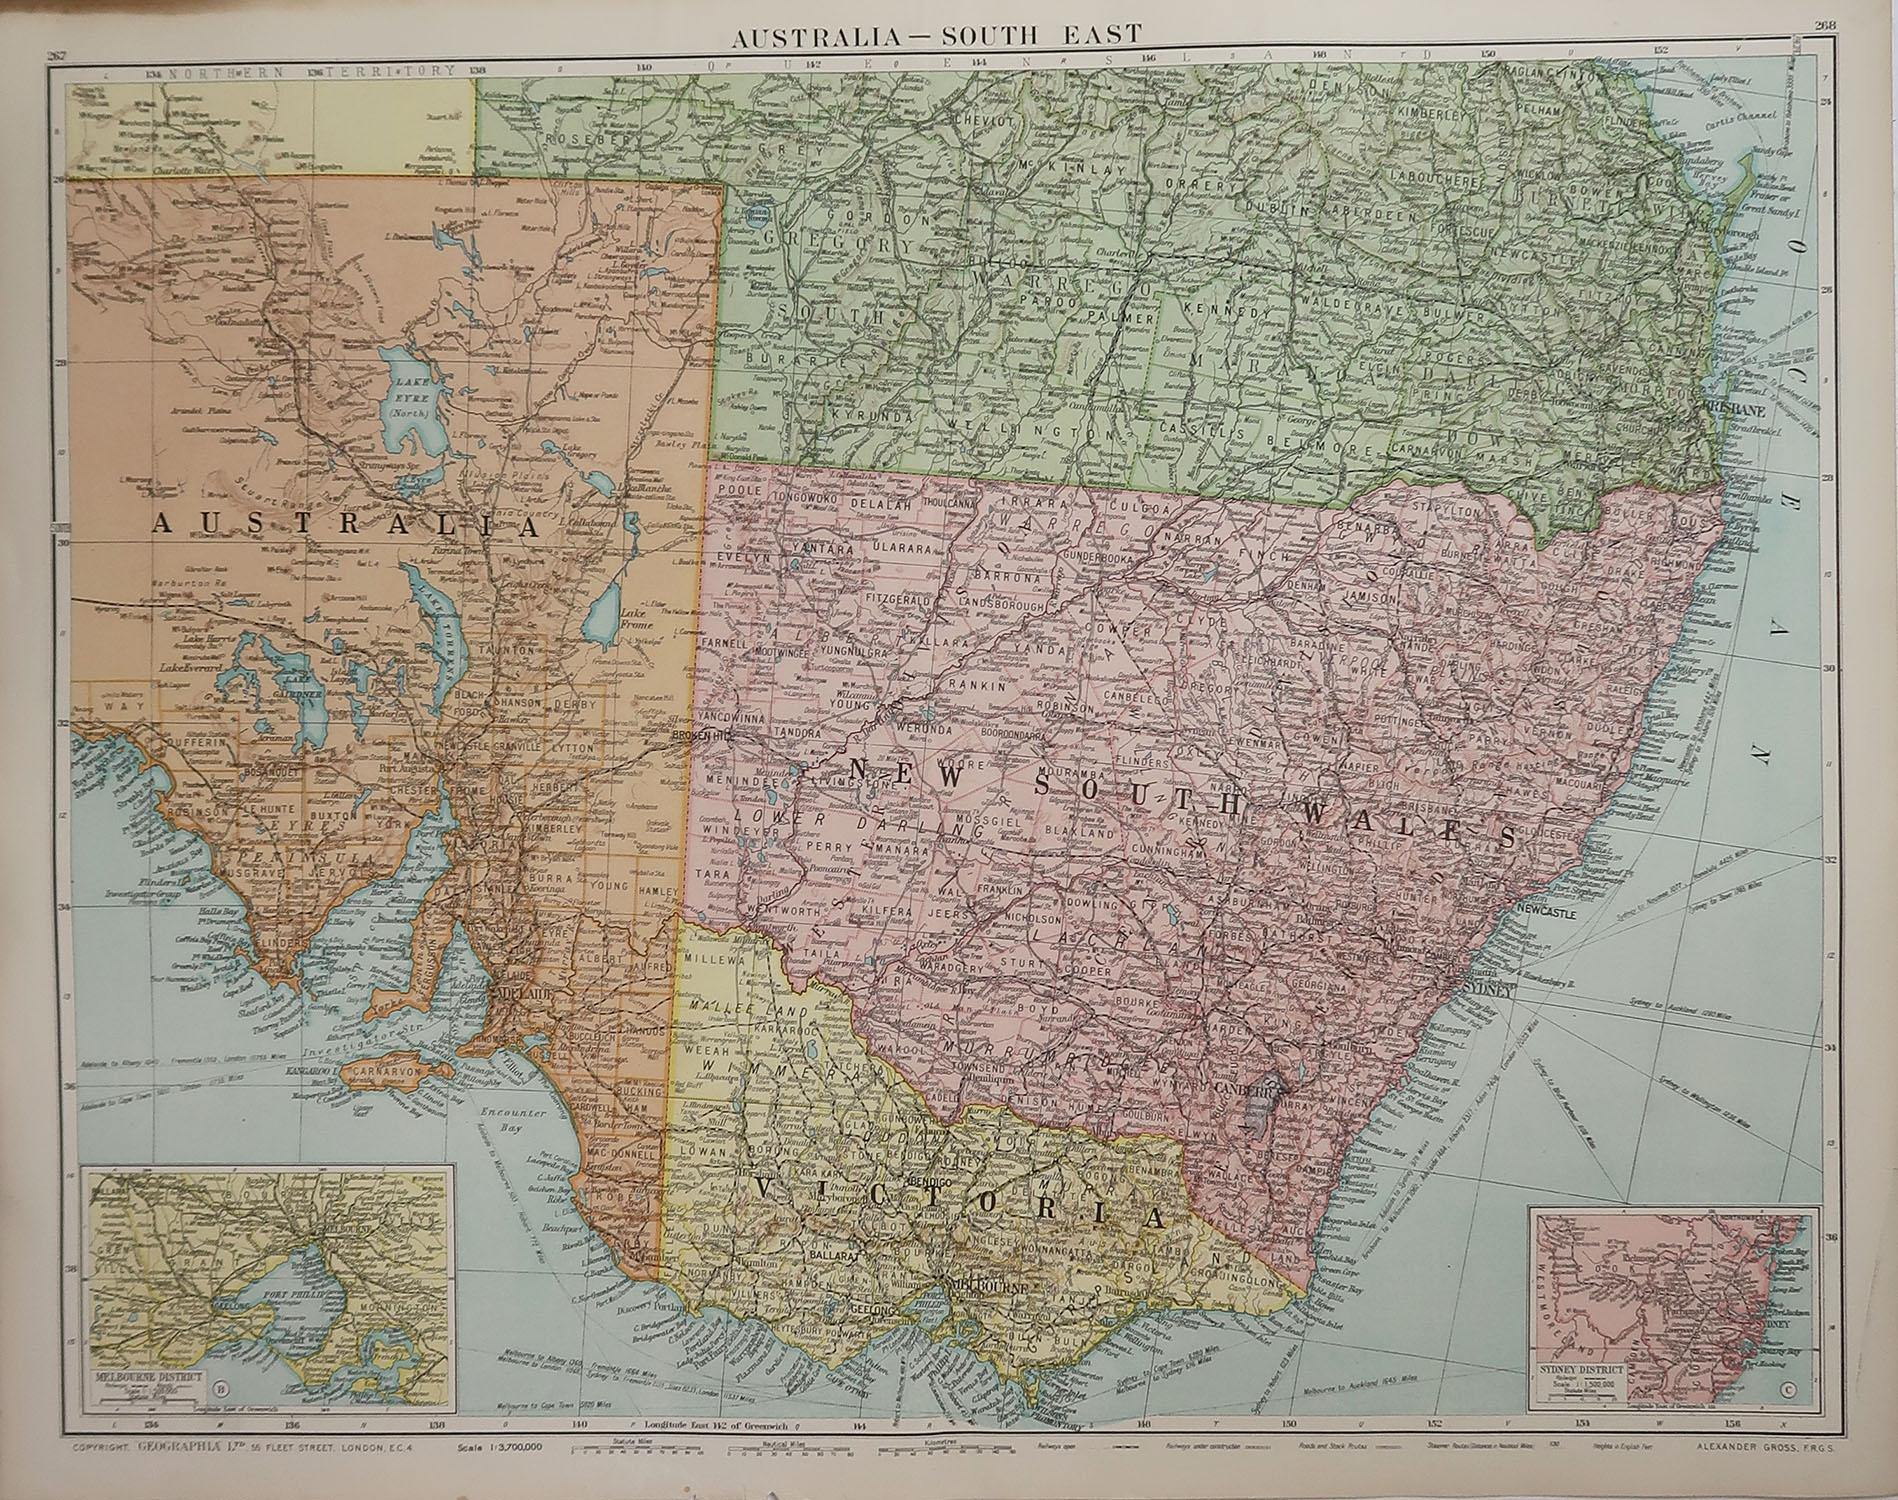 Great map of New South Wales

Original color. 

Good condition 

Published by Alexander Gross

Unframed.








